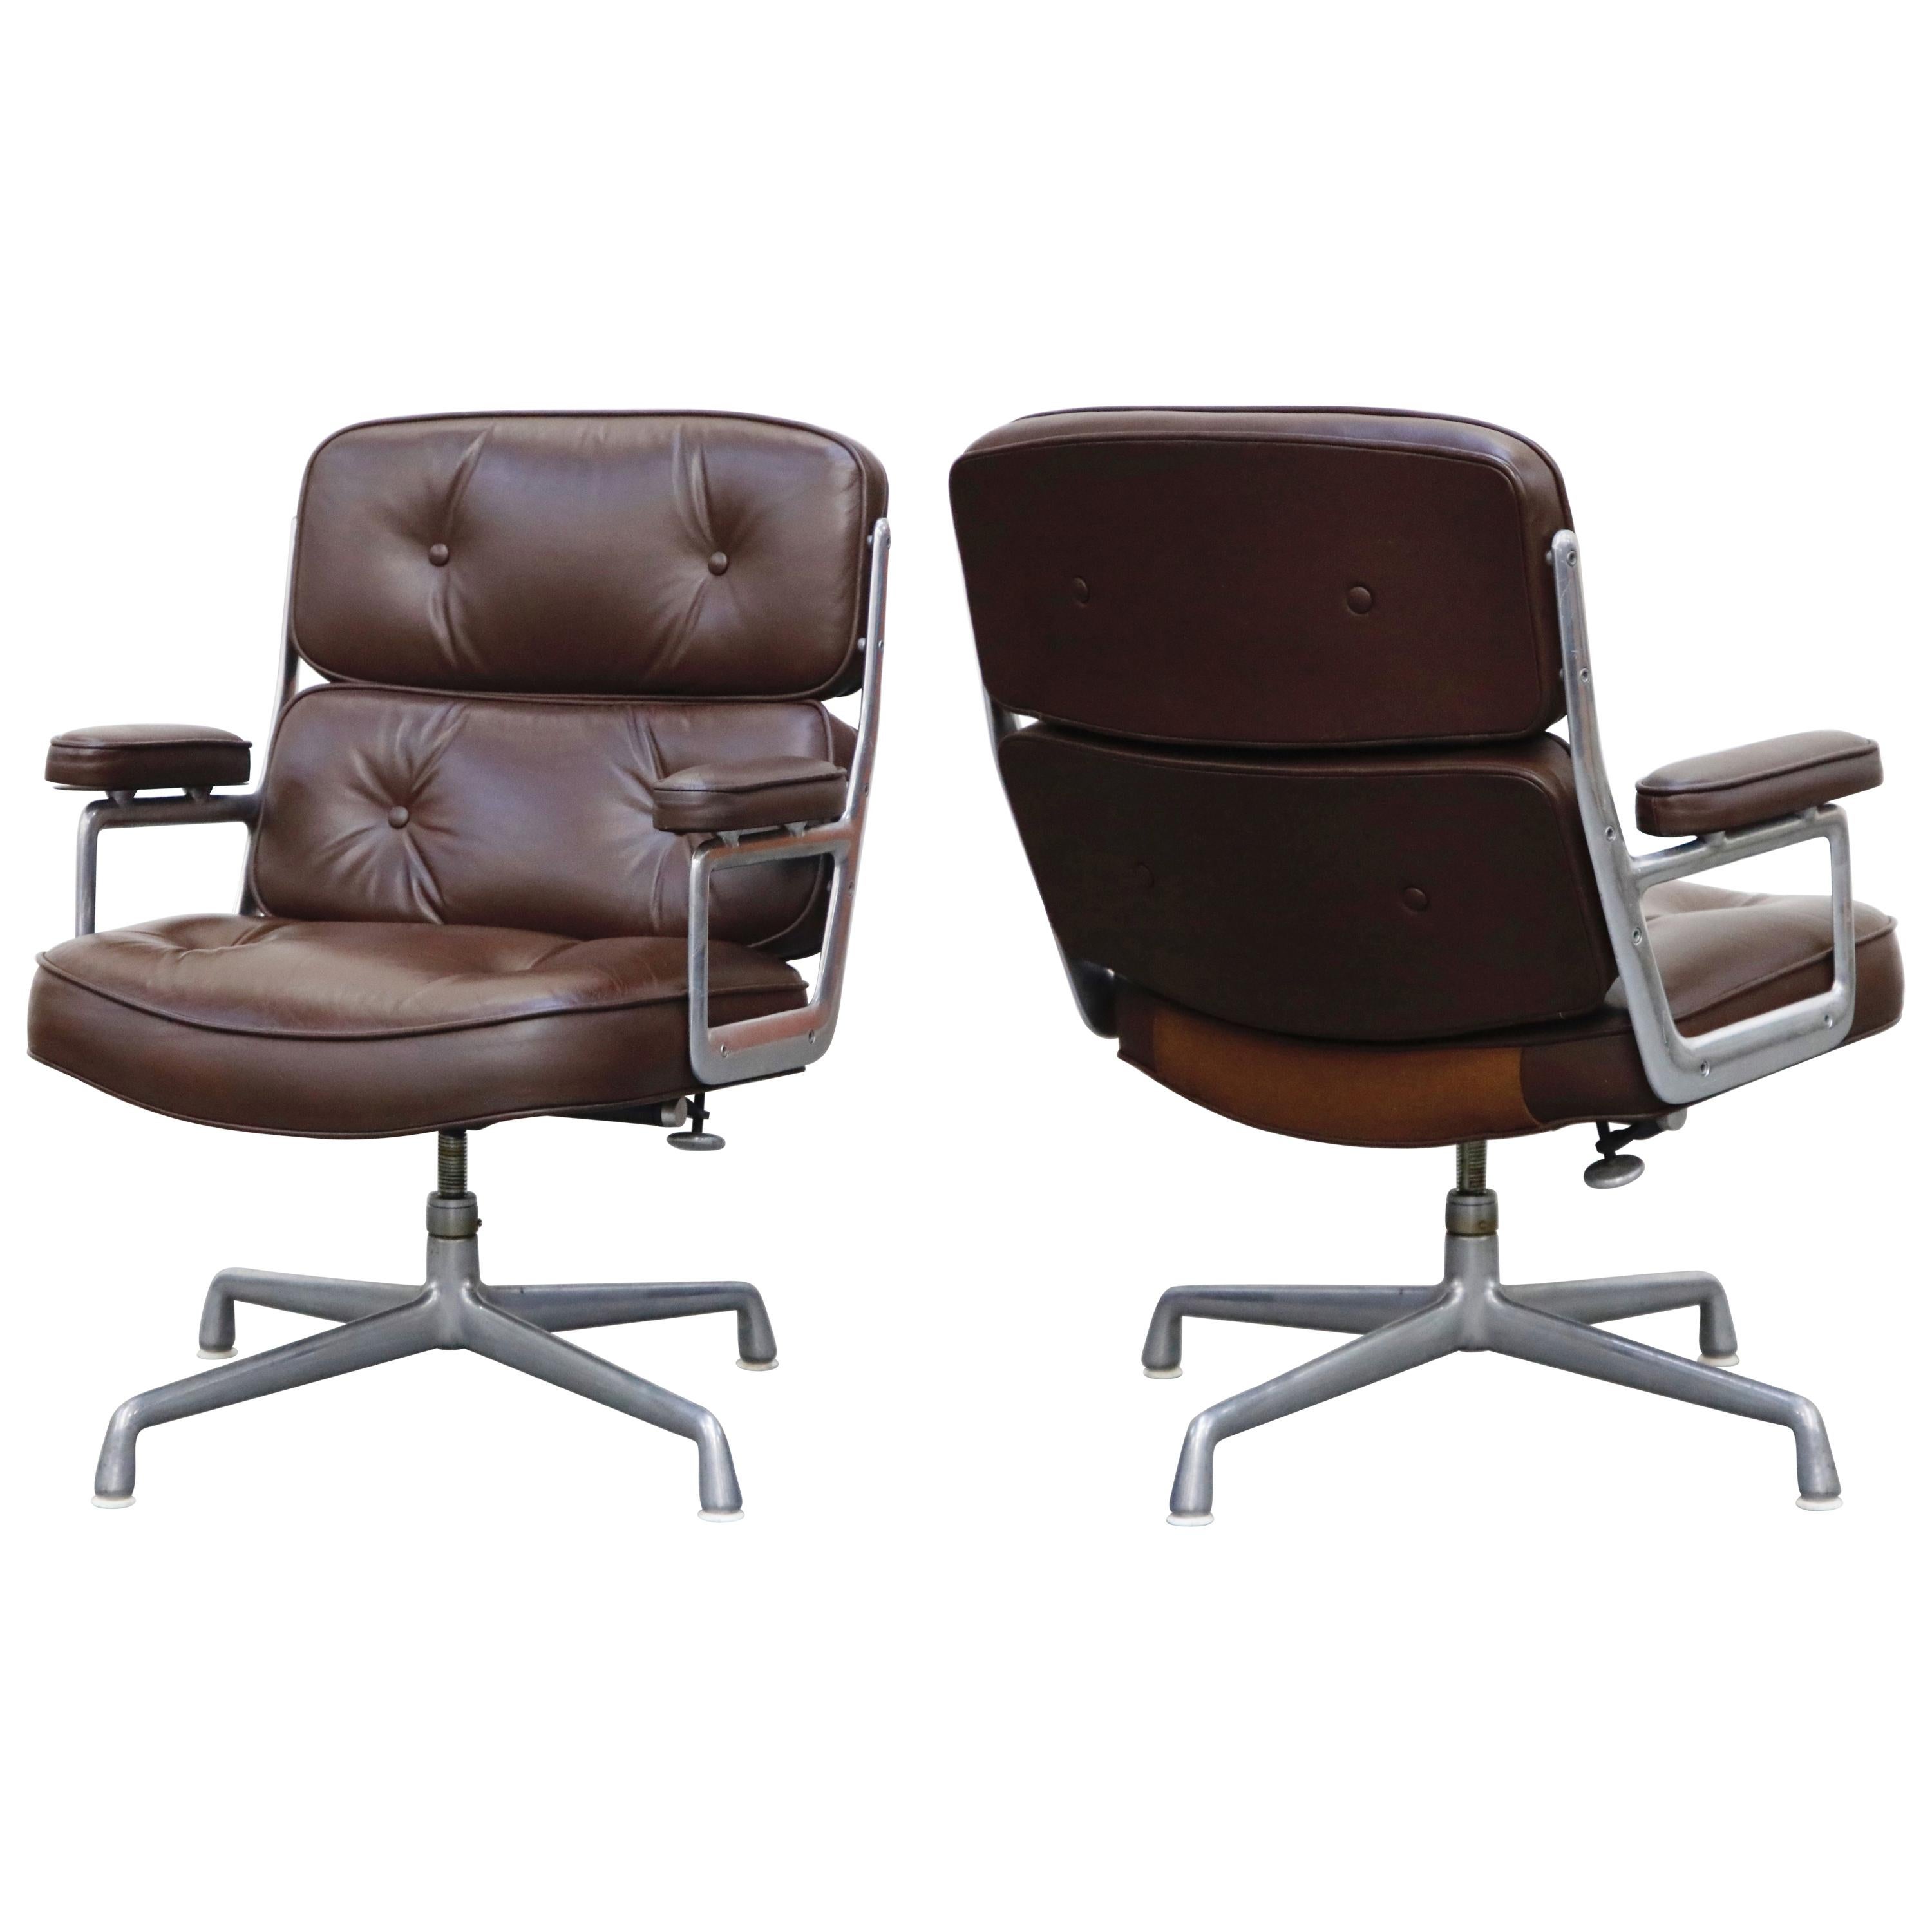 Pair of Time Life Lounge Chairs by Charles Eames for Herman Miller, 1977, Signed